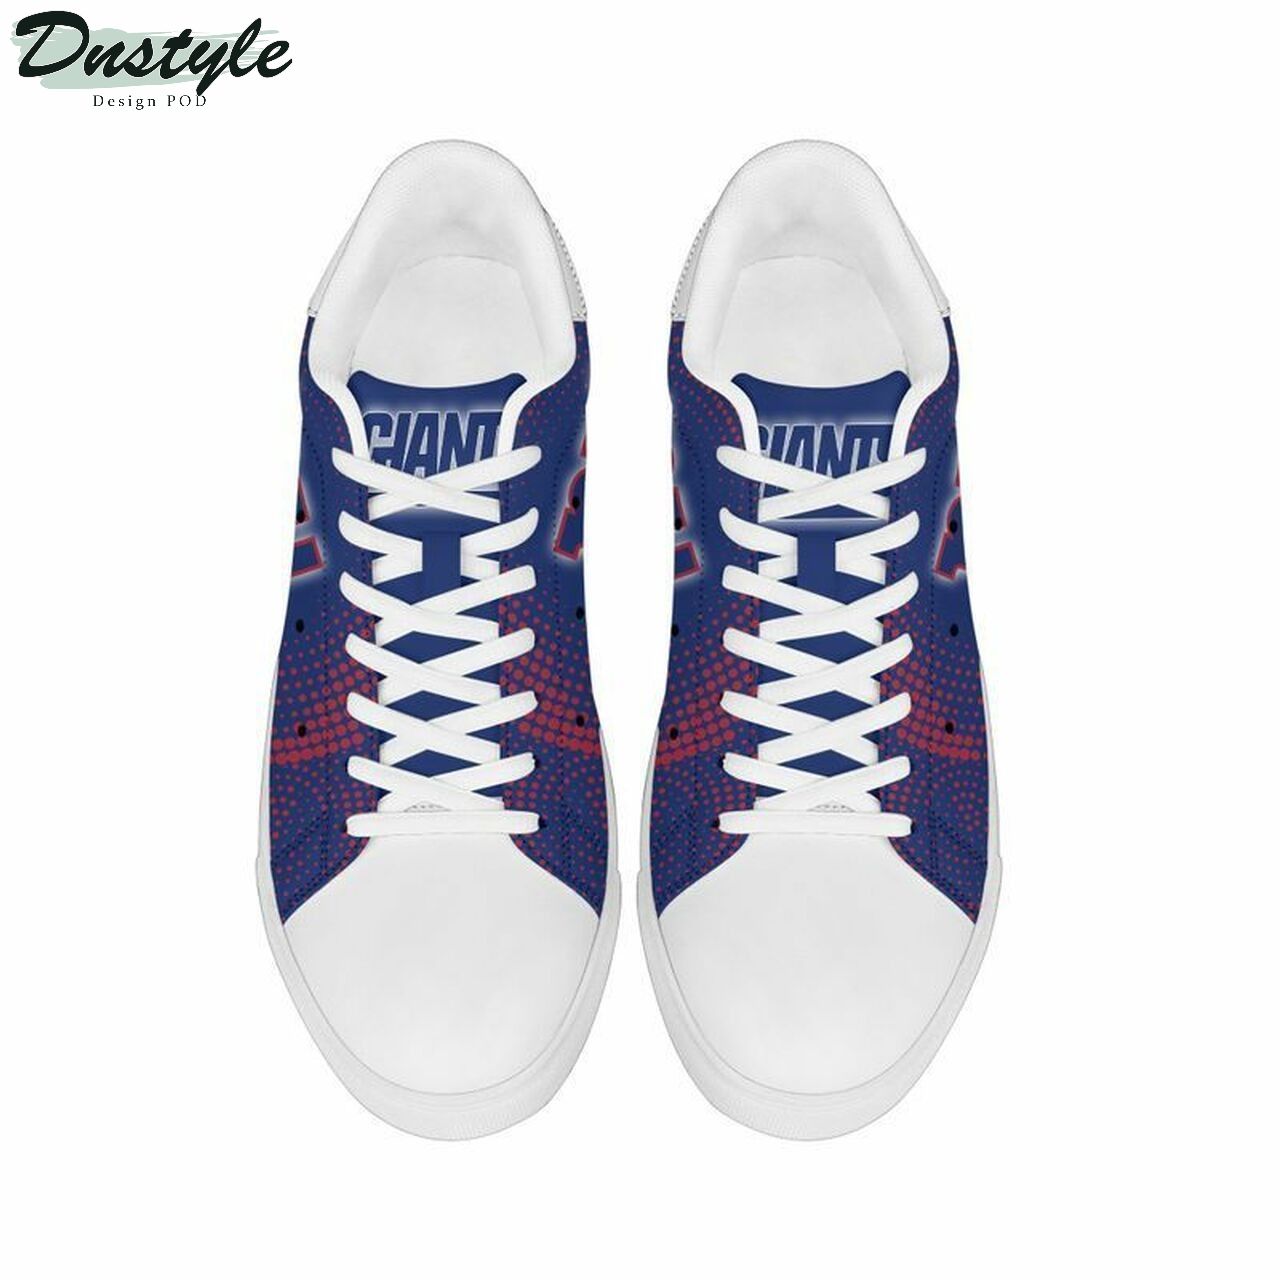 NFL New York giants stan smith low top skate shoes